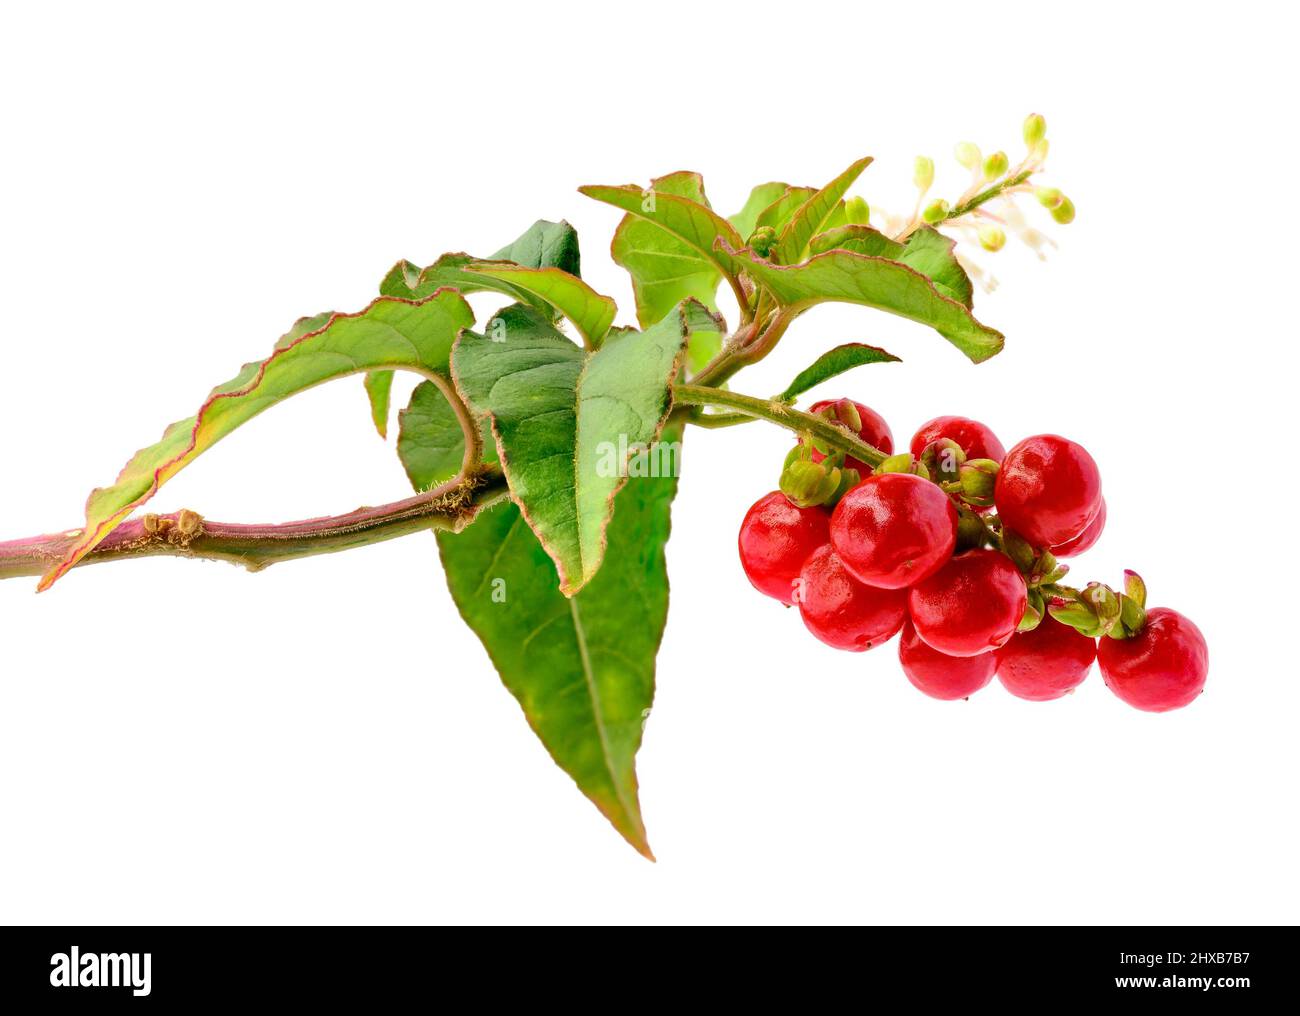 pigeon berry plant, also known as rivina humilis or blood berry, very harmful and toxic to humans and pets, isolated on white background, closeup Stock Photo